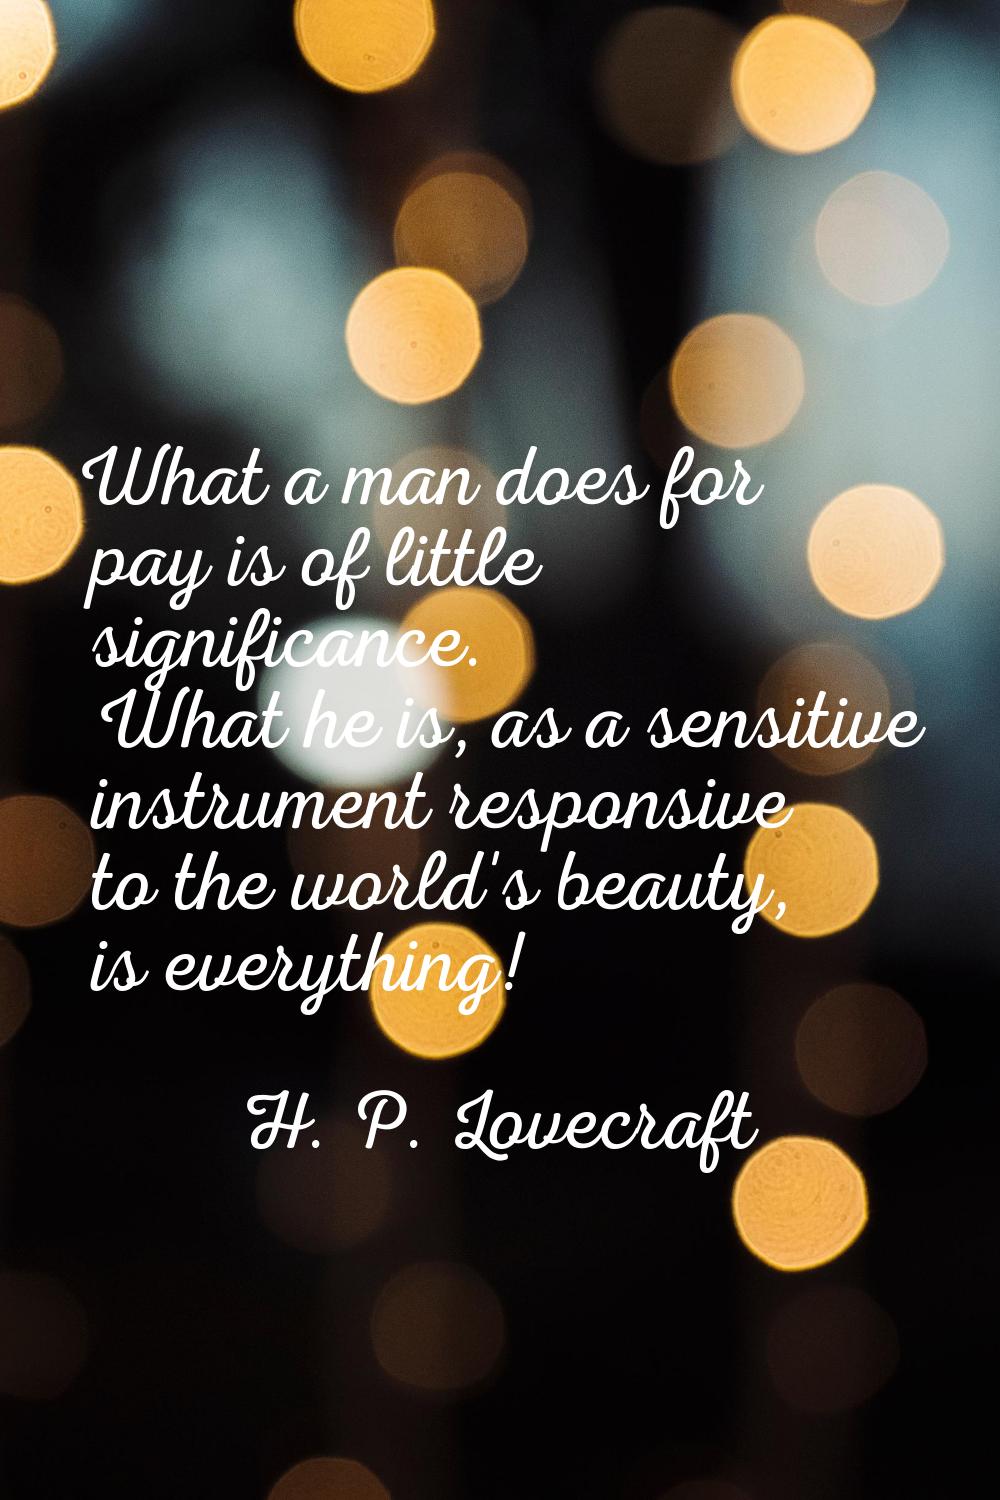 What a man does for pay is of little significance. What he is, as a sensitive instrument responsive